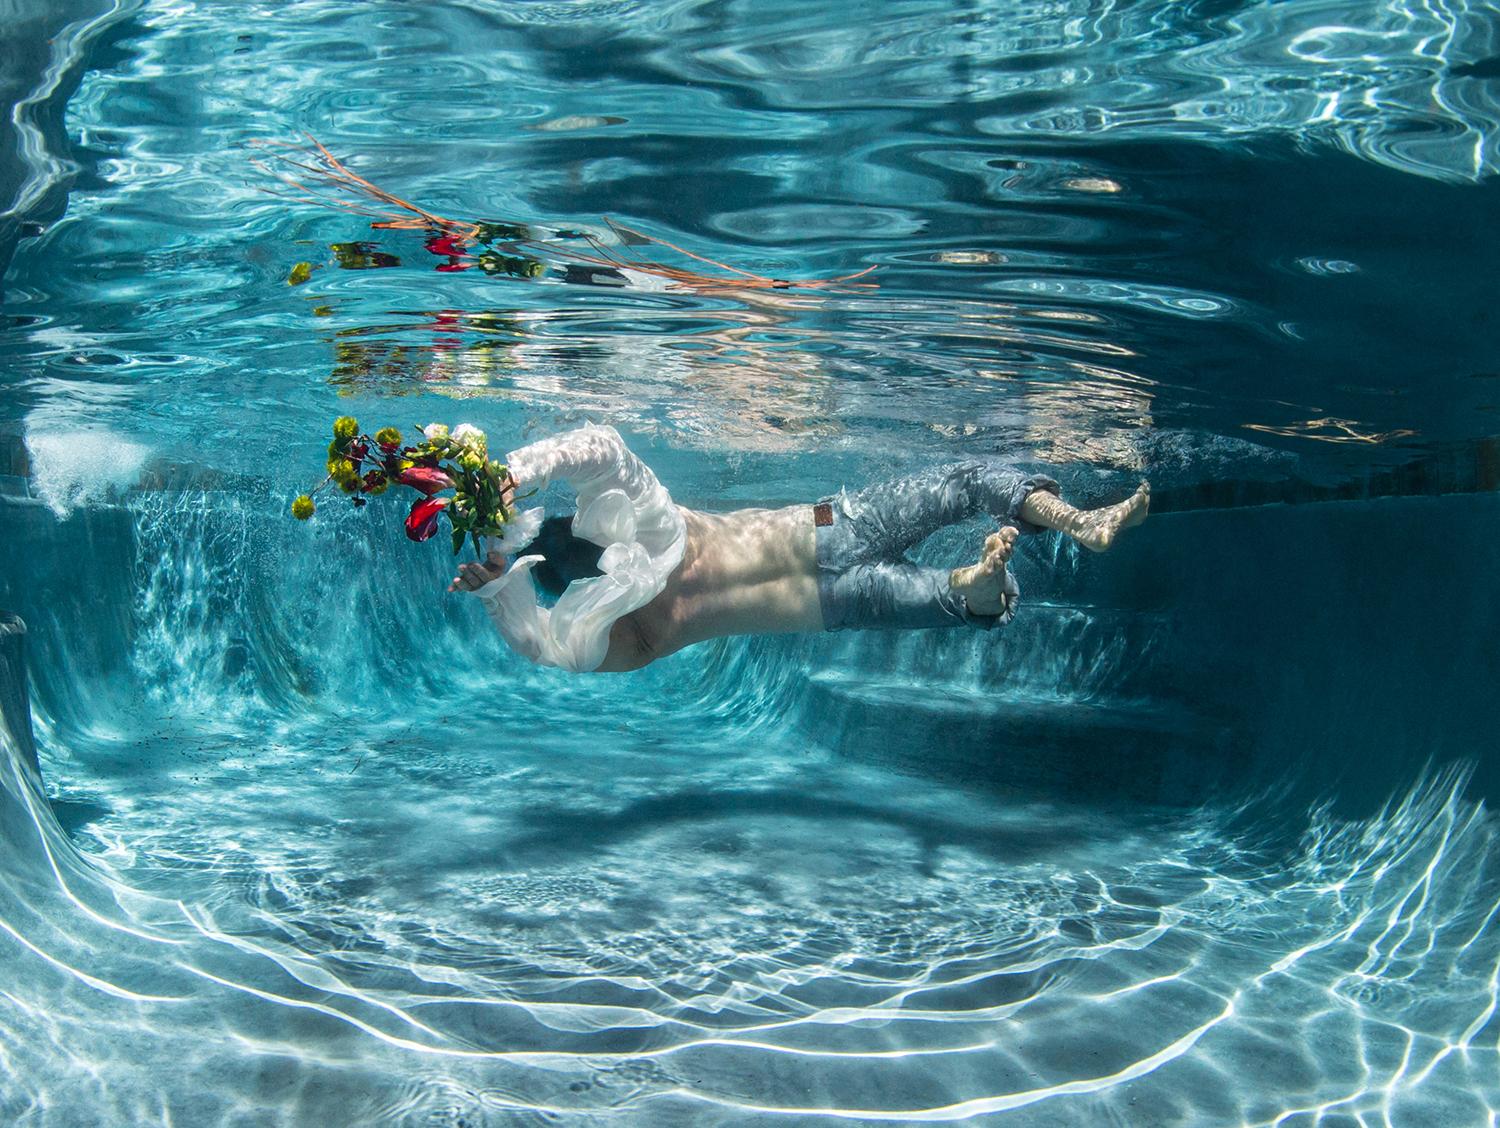 Cold Song III - underwater photograph - archival pigment print - Photograph by Alex Sher